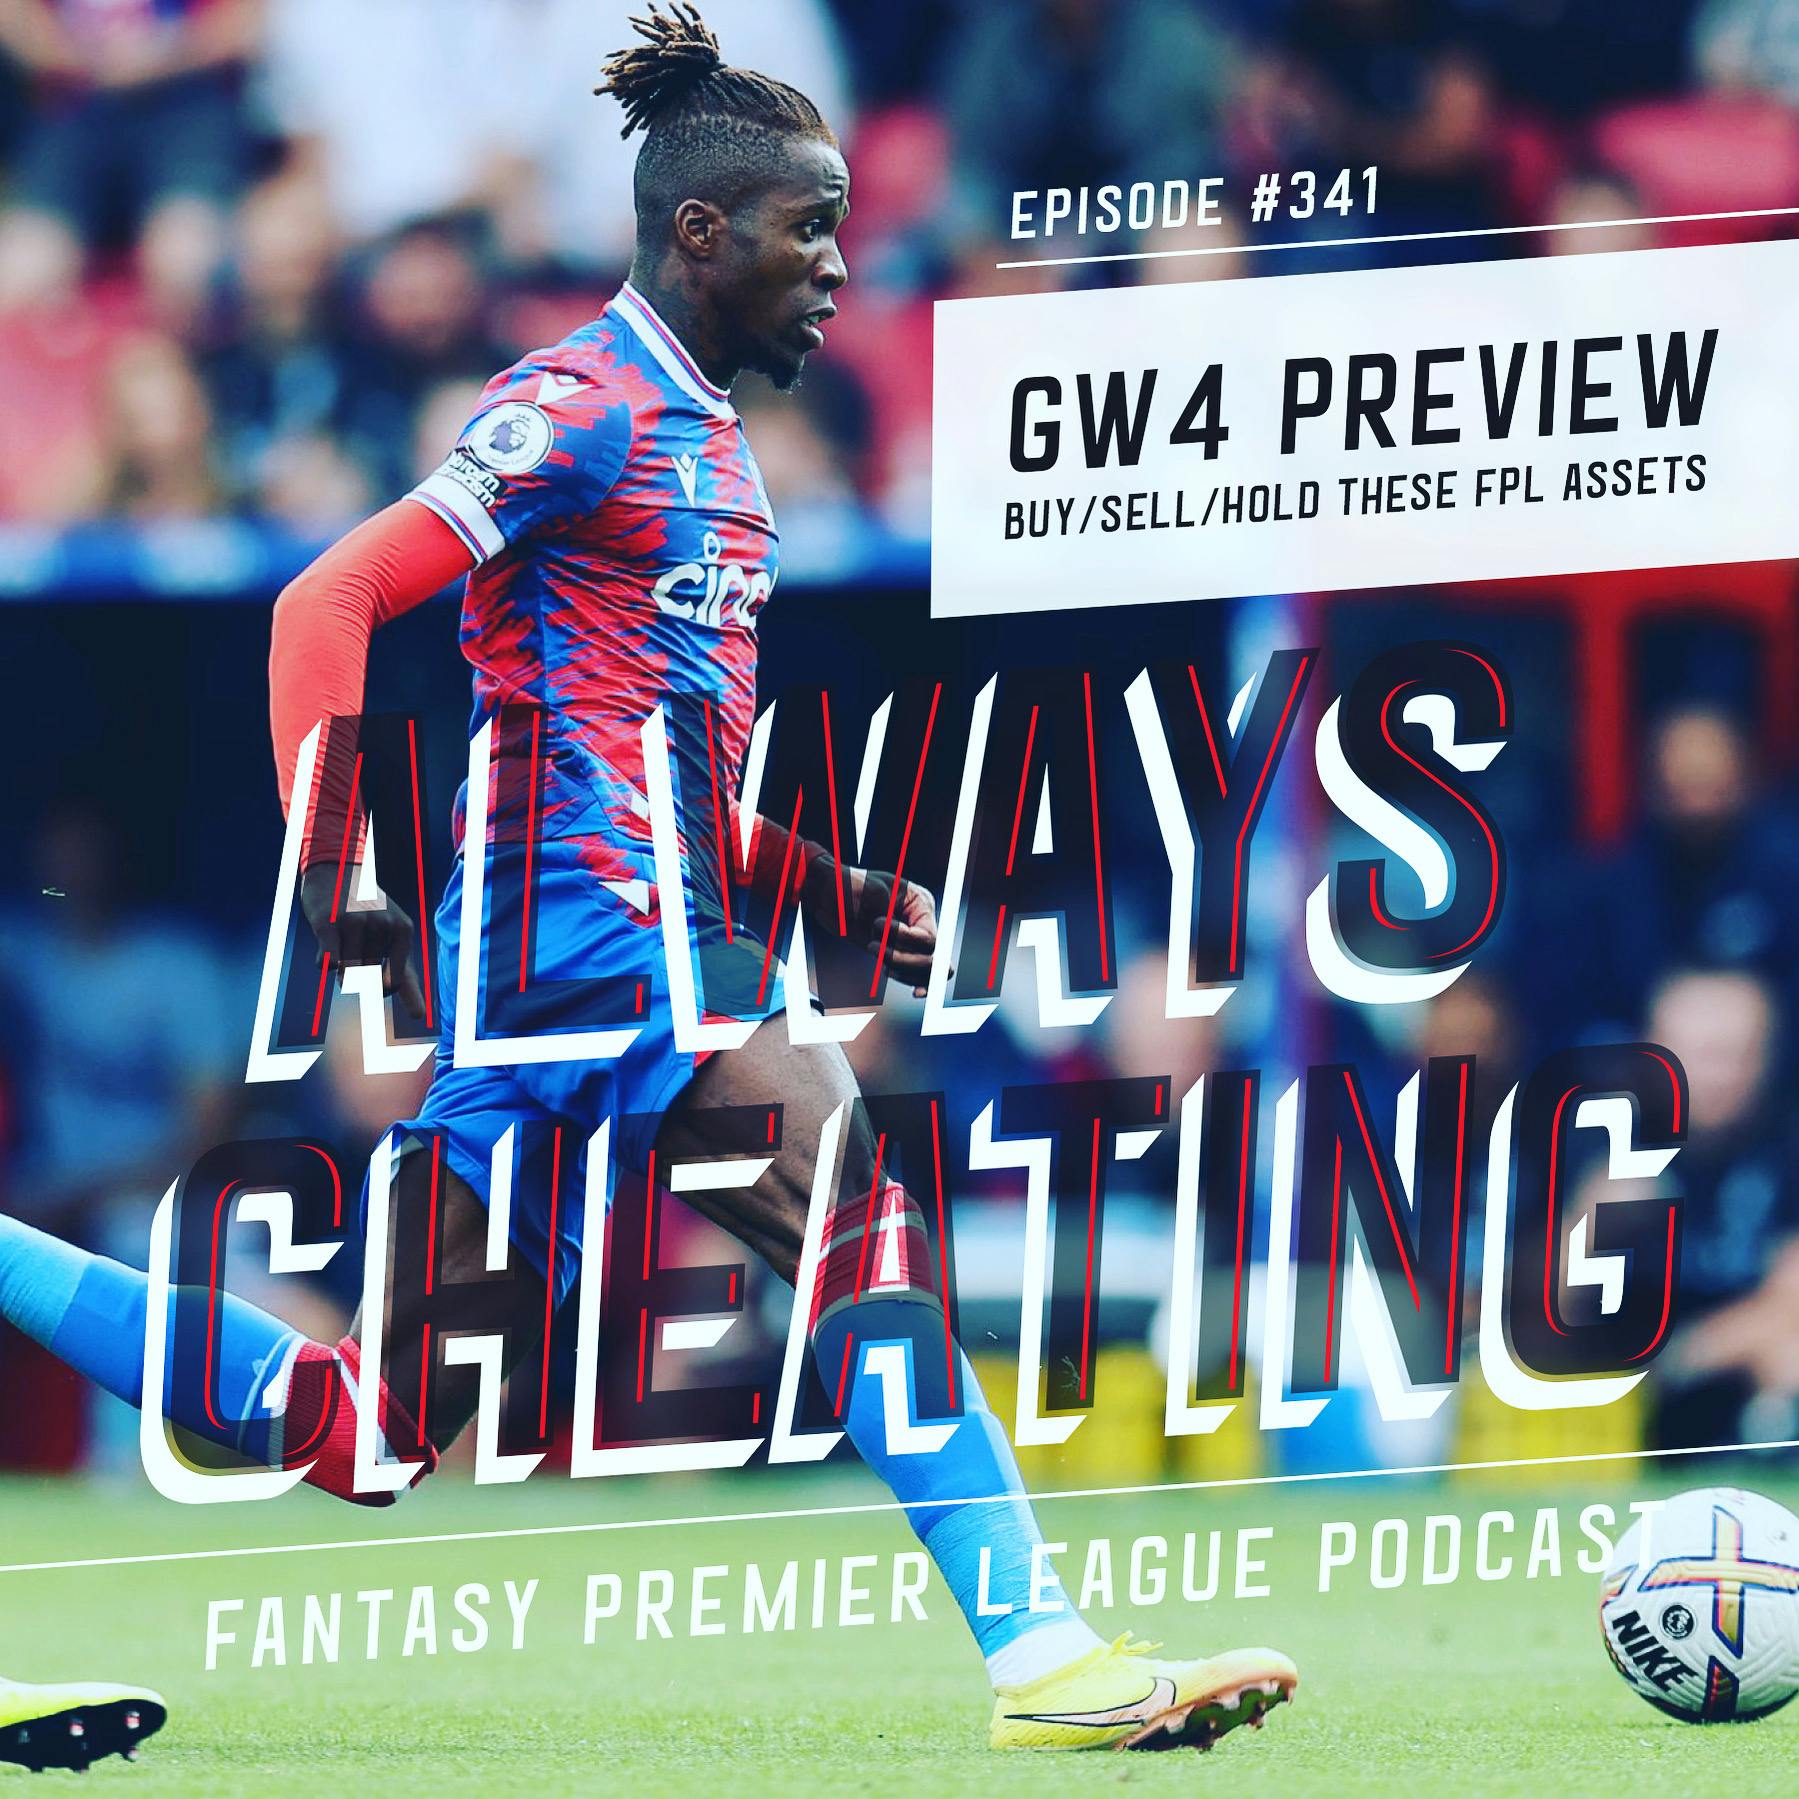 Buy/Sell/Hold These FPL Assets & GW4 Preview